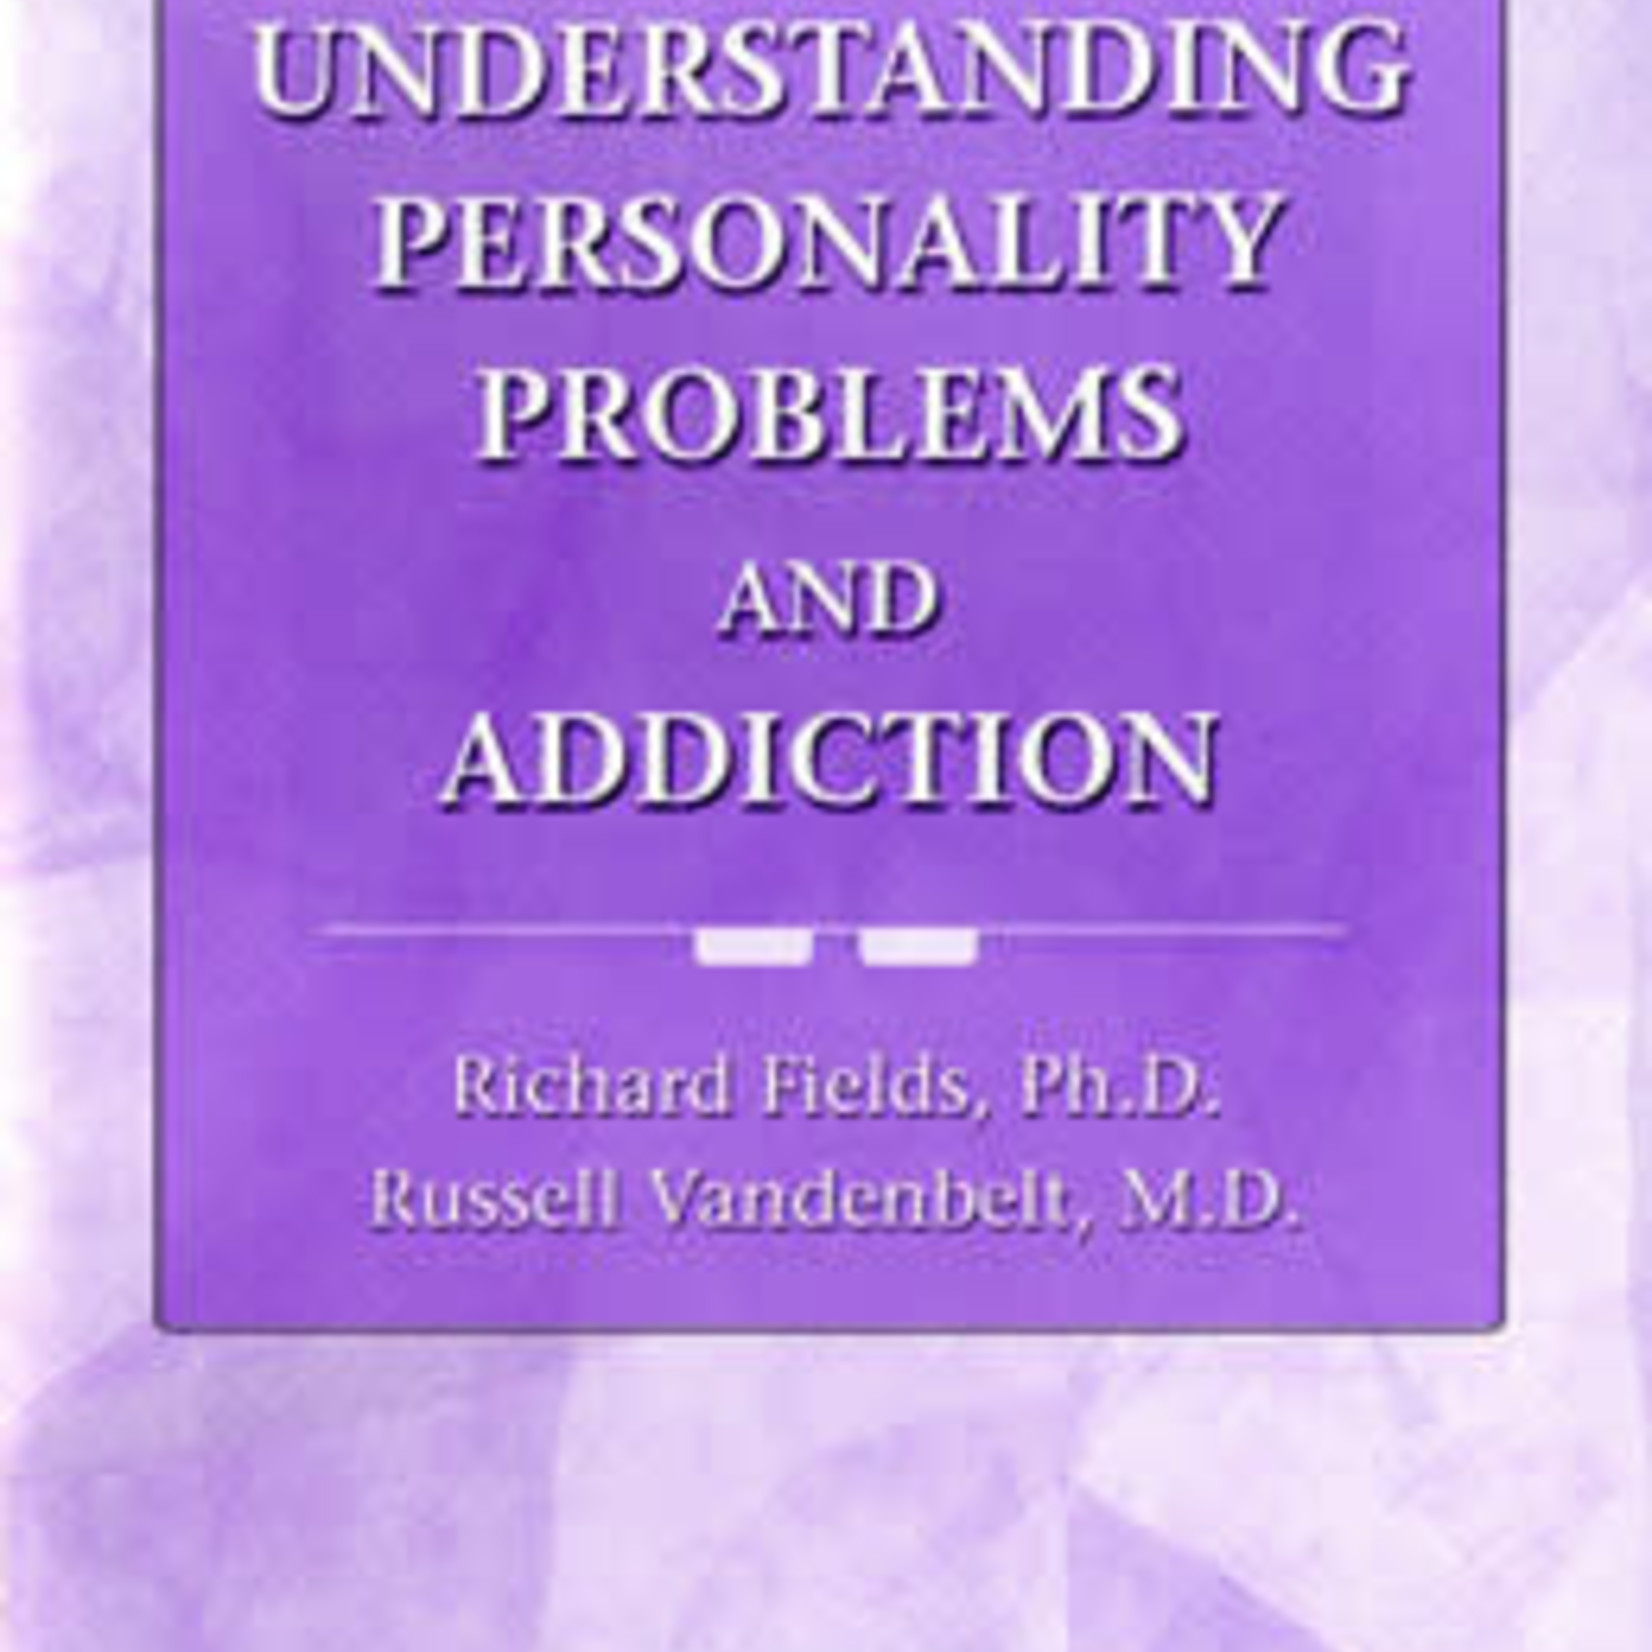 Understanding Personality Problems and Addiction [Pamphlet]